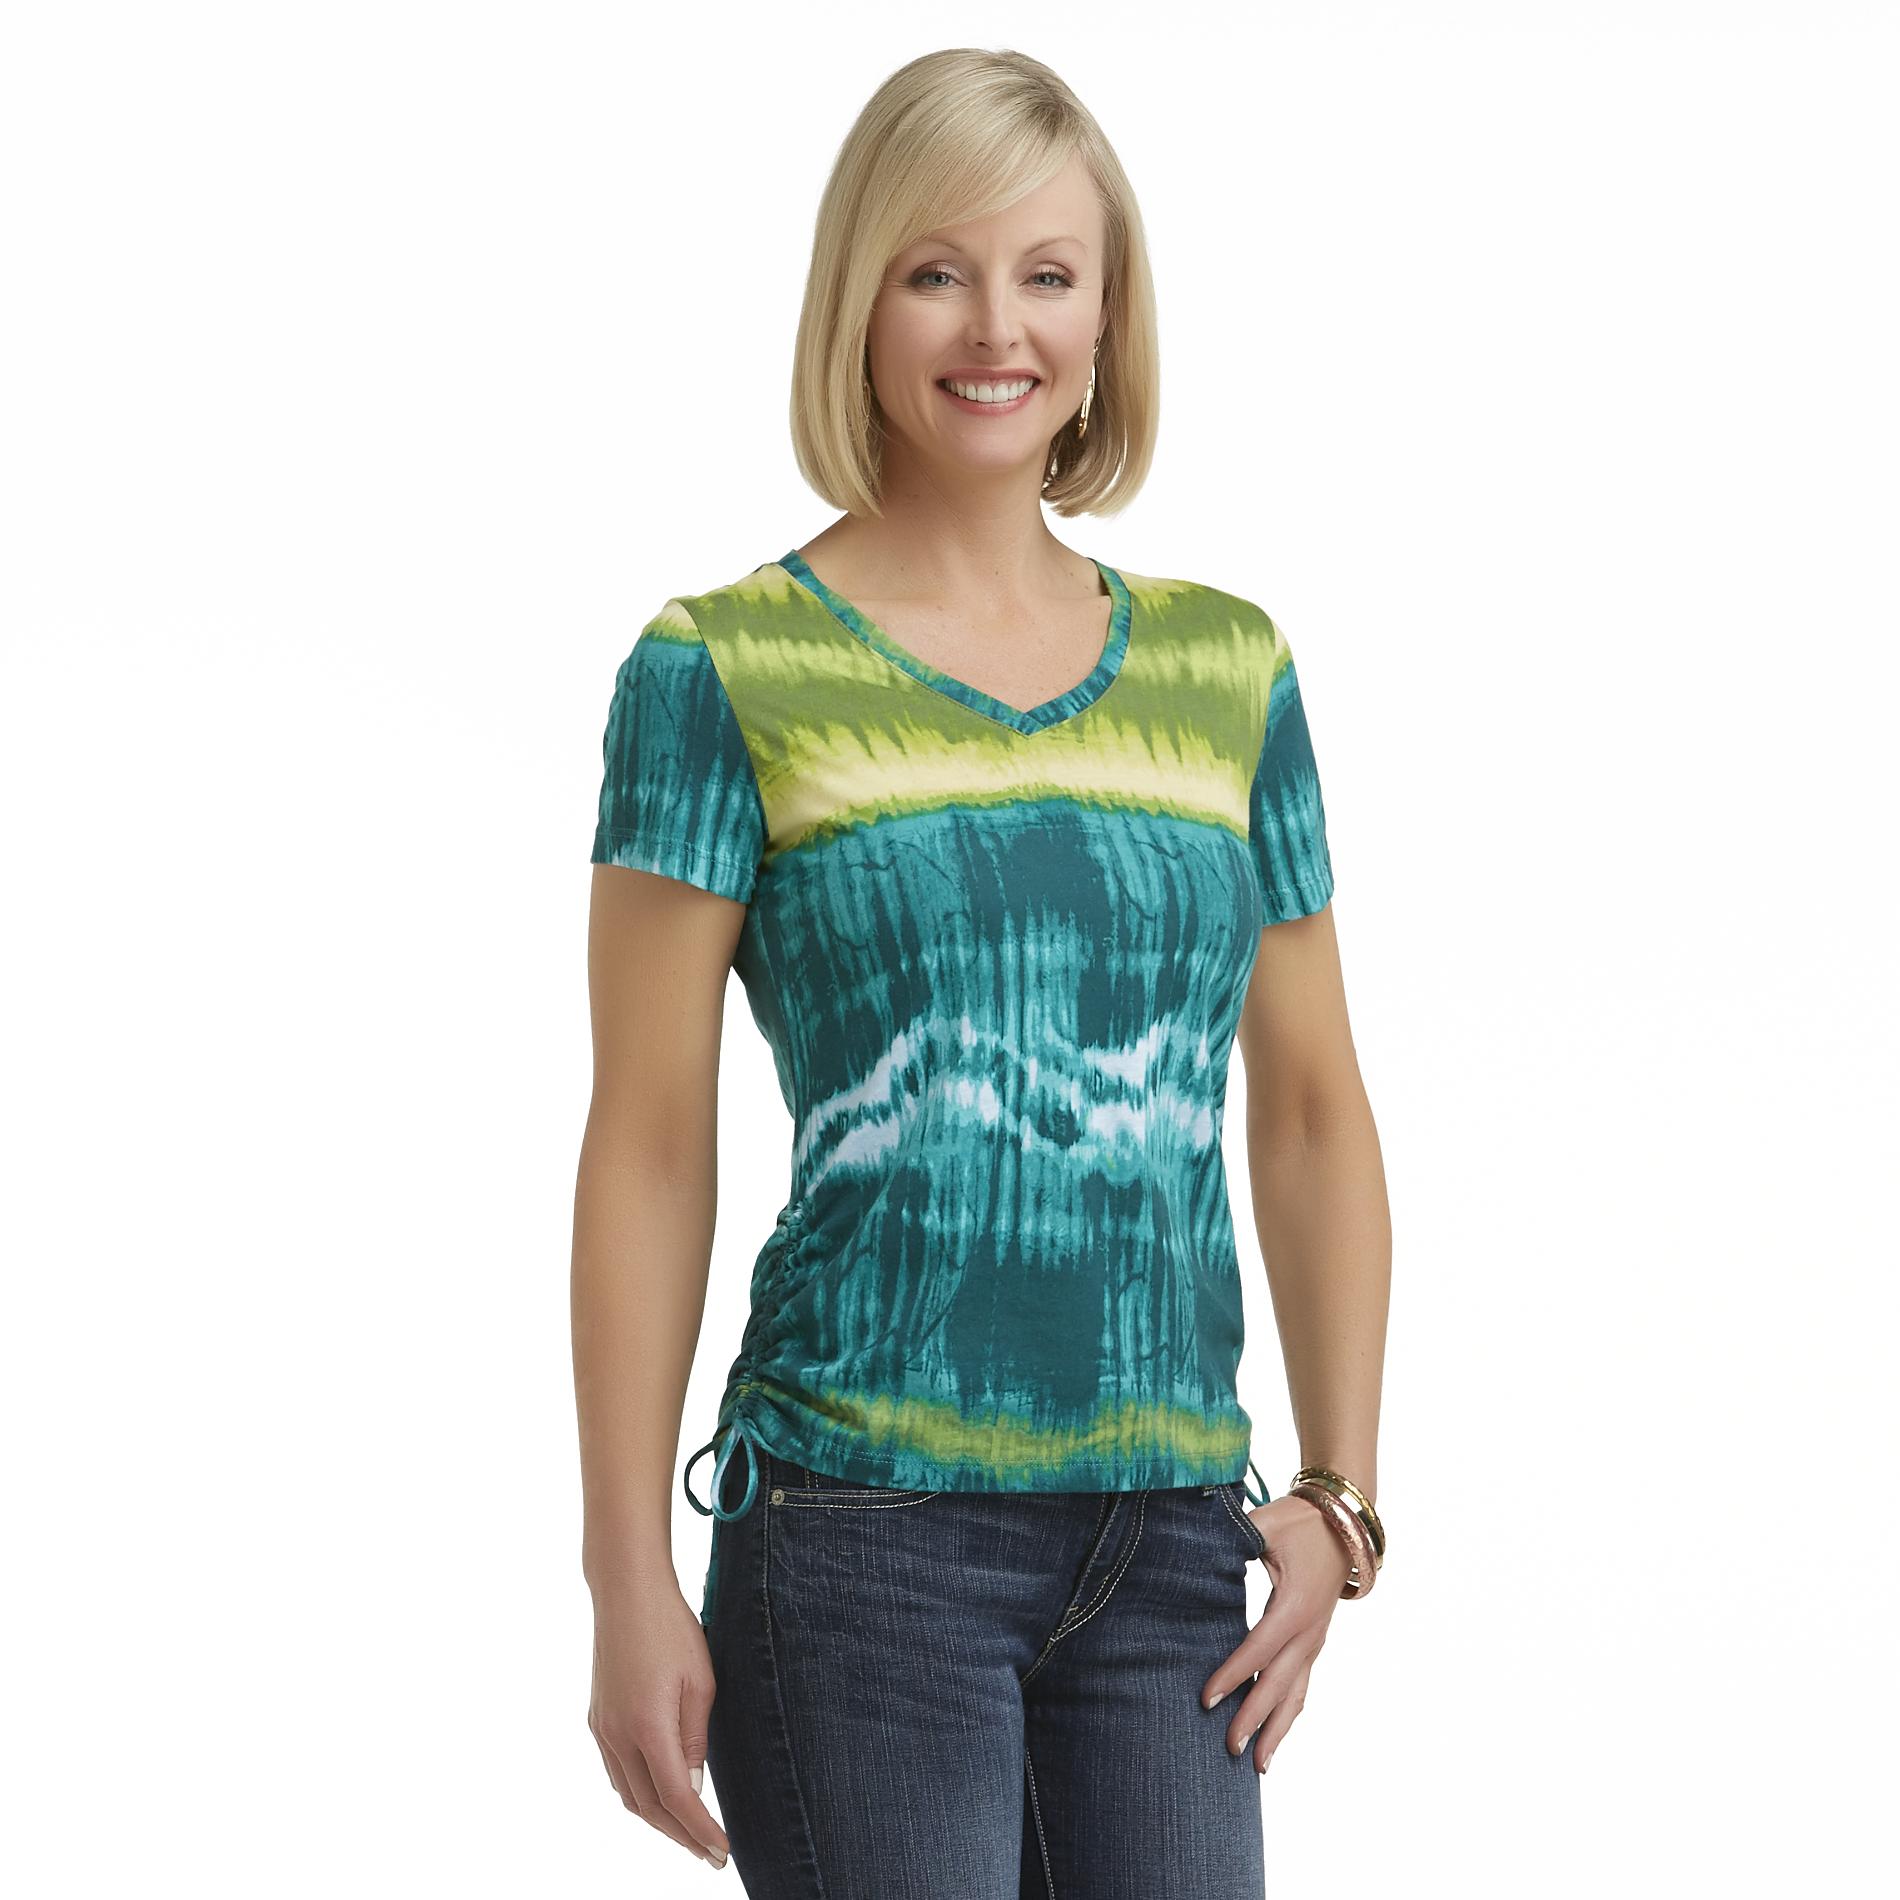 Basic Editions Women's Shirred Top - Tie-Dye